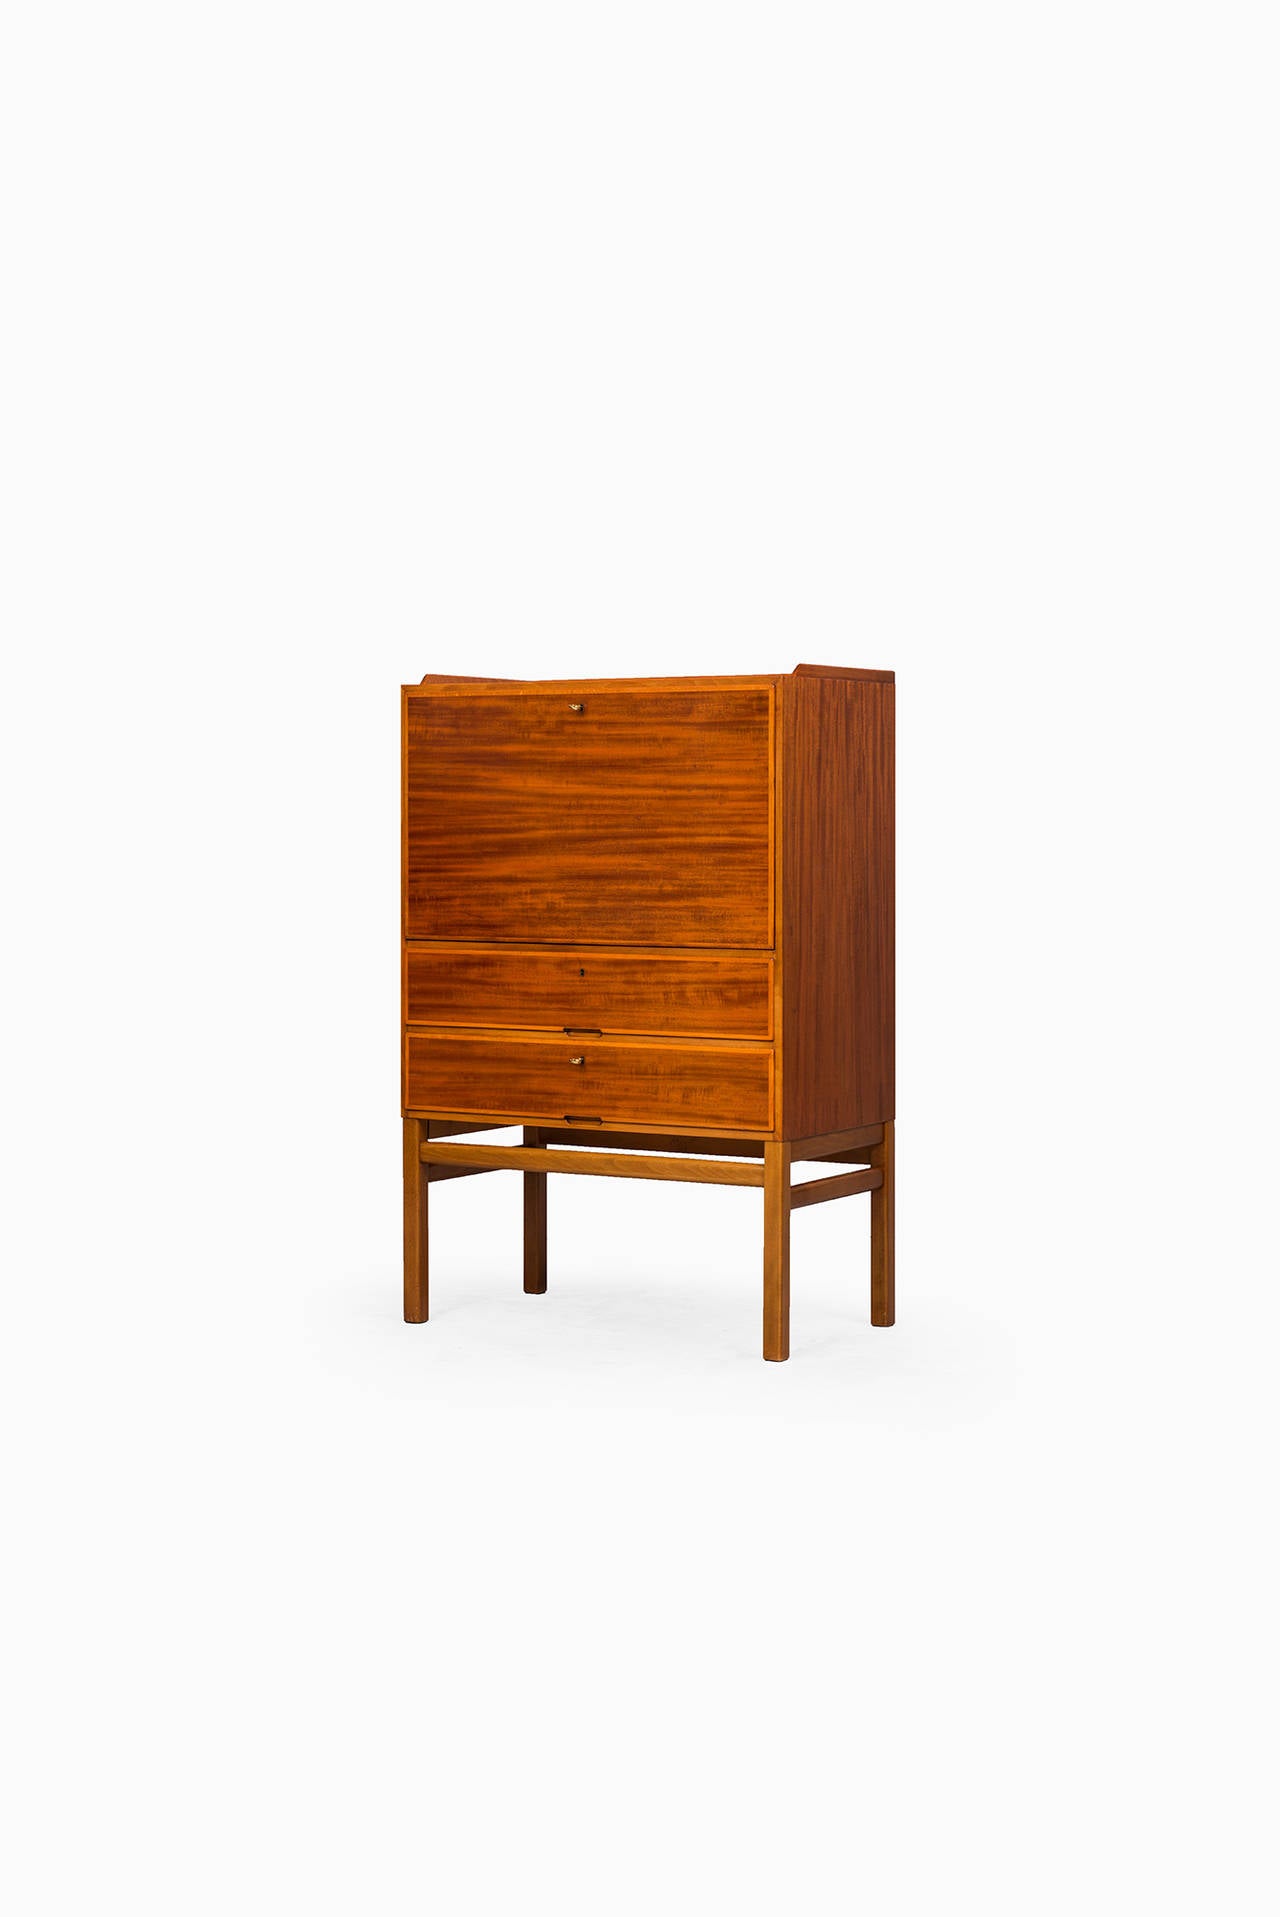 Axel Larsson cabinet / secretaire in mahogany by Bodafors in Sweden 1